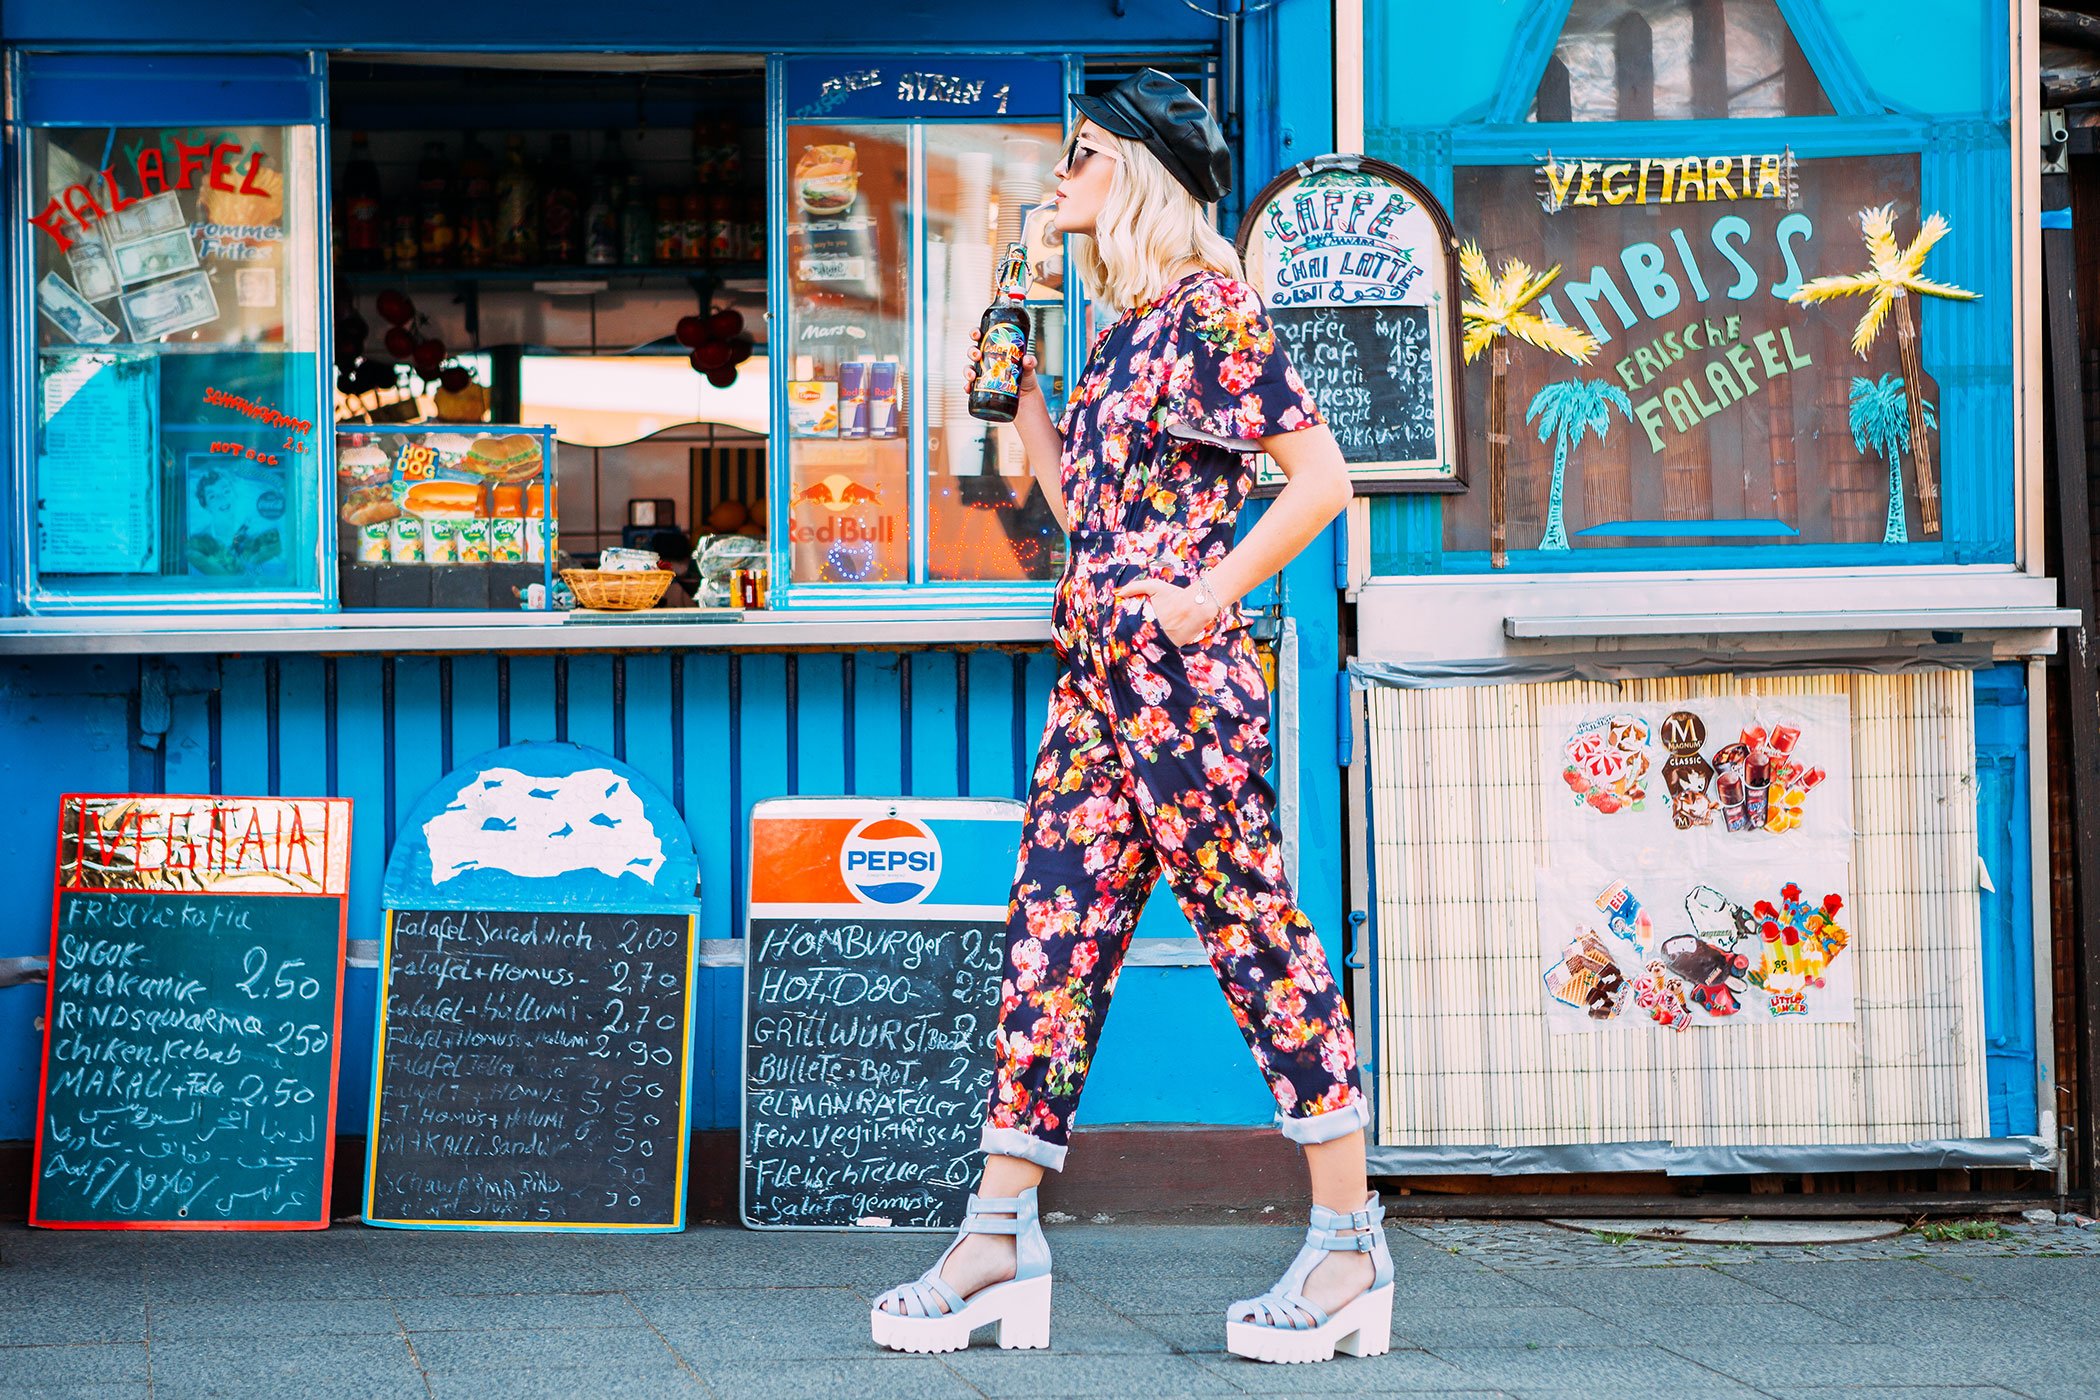 mikuta with flower jumpsuit at the kiosk